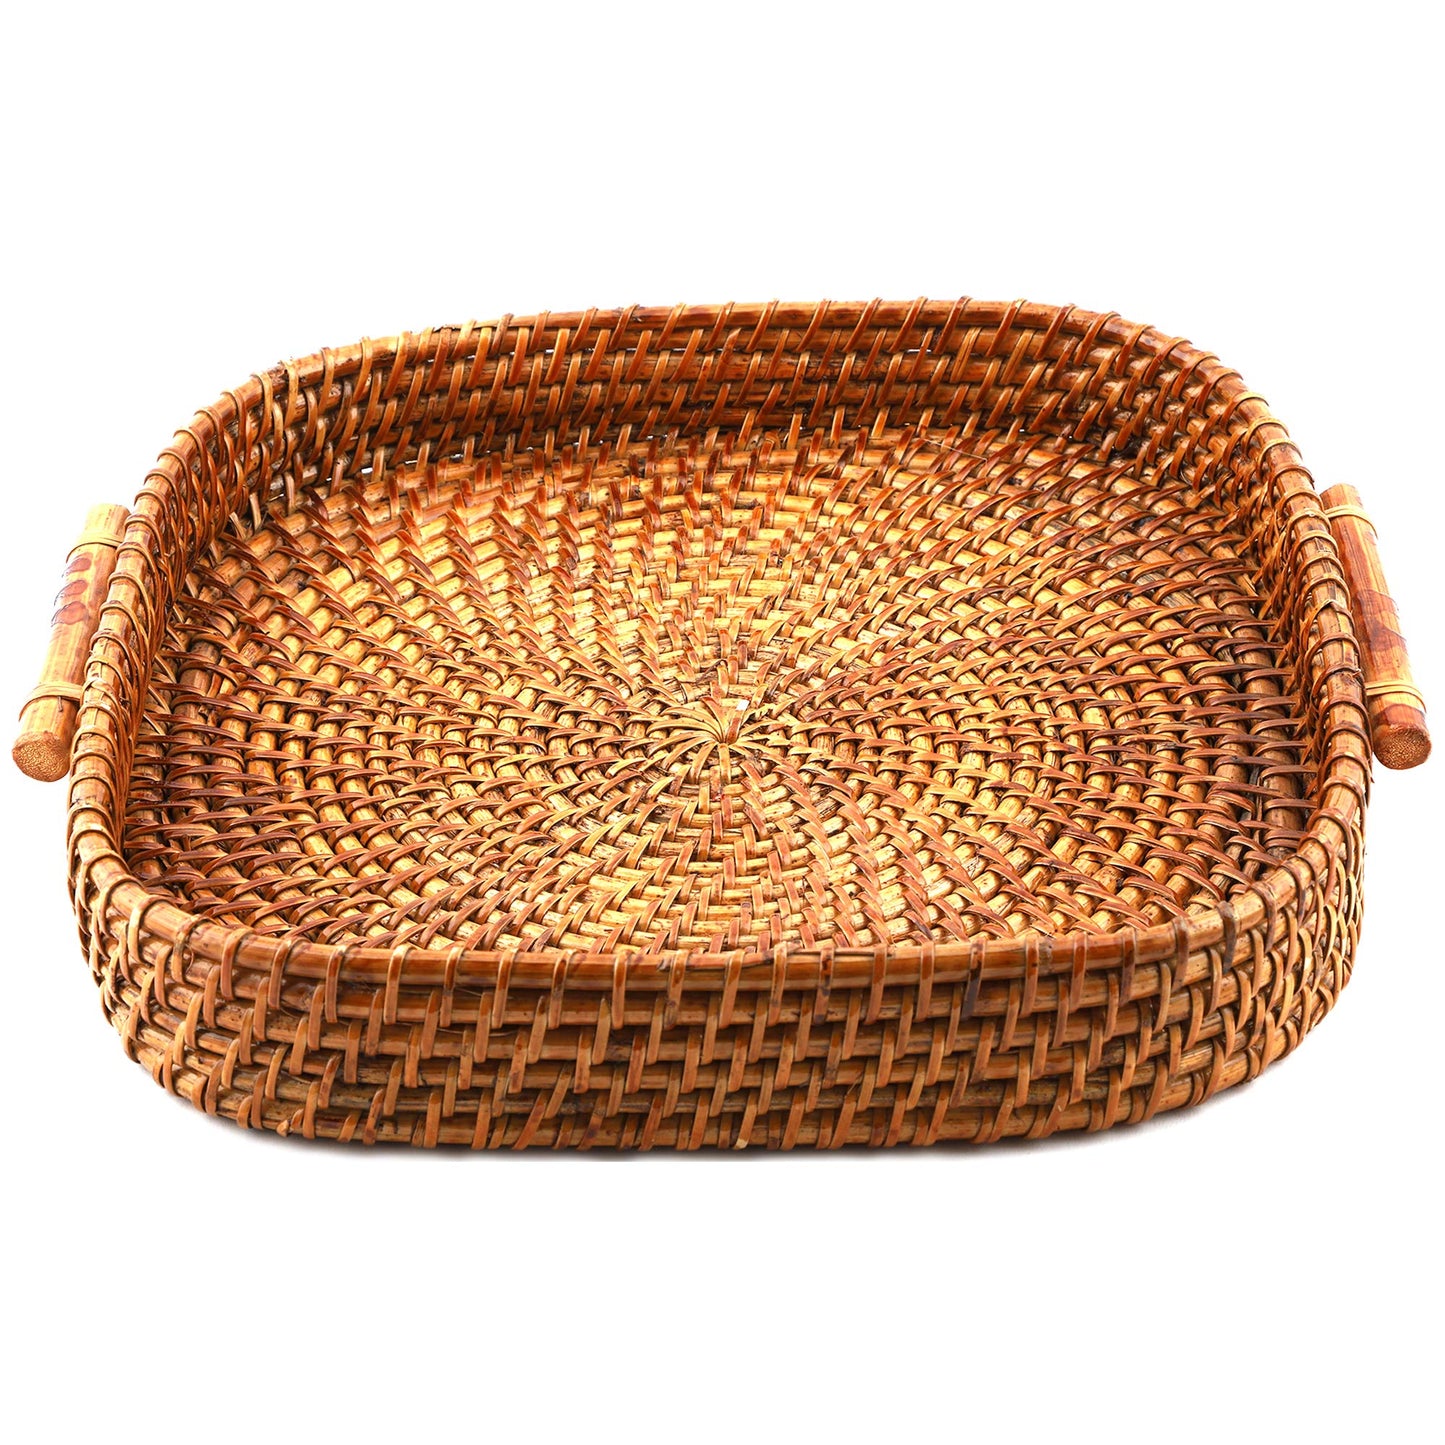 AKWAY Wicker Serving Tray Wooden Serving Tray for home | Dining table decorative trays | Serving tray for party guests | platter with handles Diwali or Deepawali Gifts | 10 x 10 x 2 (Beige) - Akway